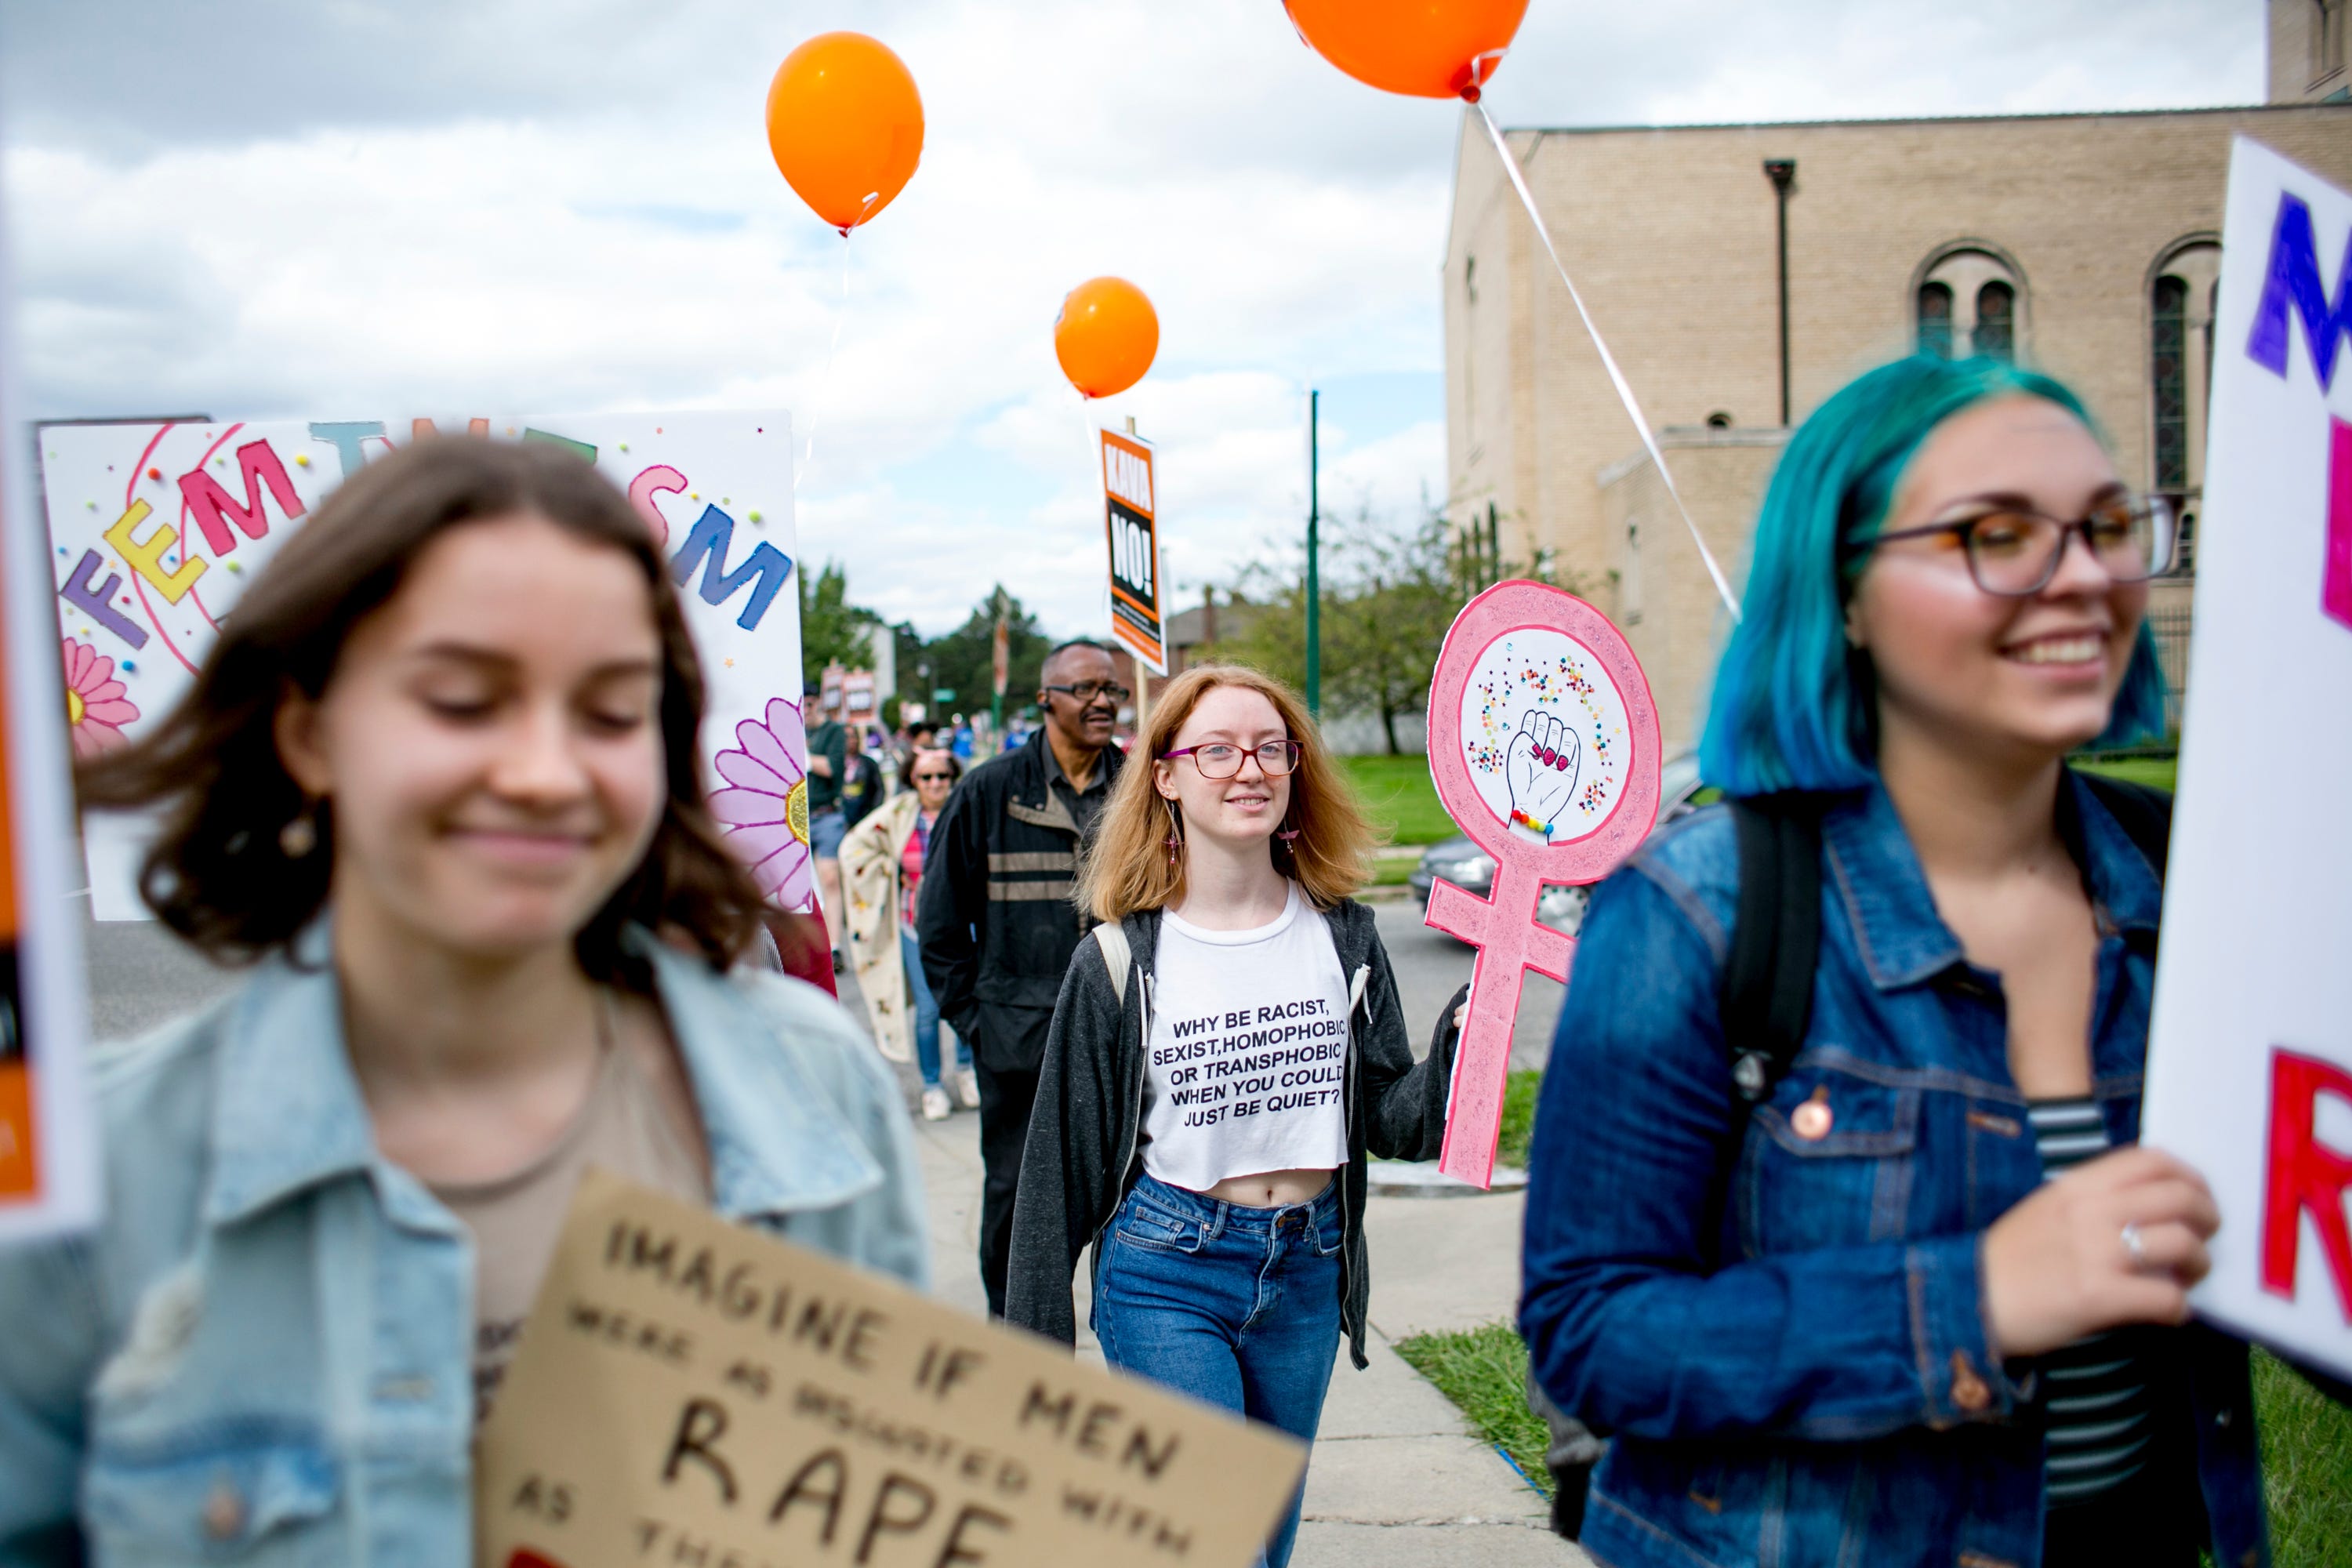 Alyssa Johnston, 18, of Warren walks down the street during the Slut Walk near Palmer Park in Detroit on September 22, 2018.  The march and rally brought out about 70 demonstrators protesting sexual violence and other forms of aggression against woman.